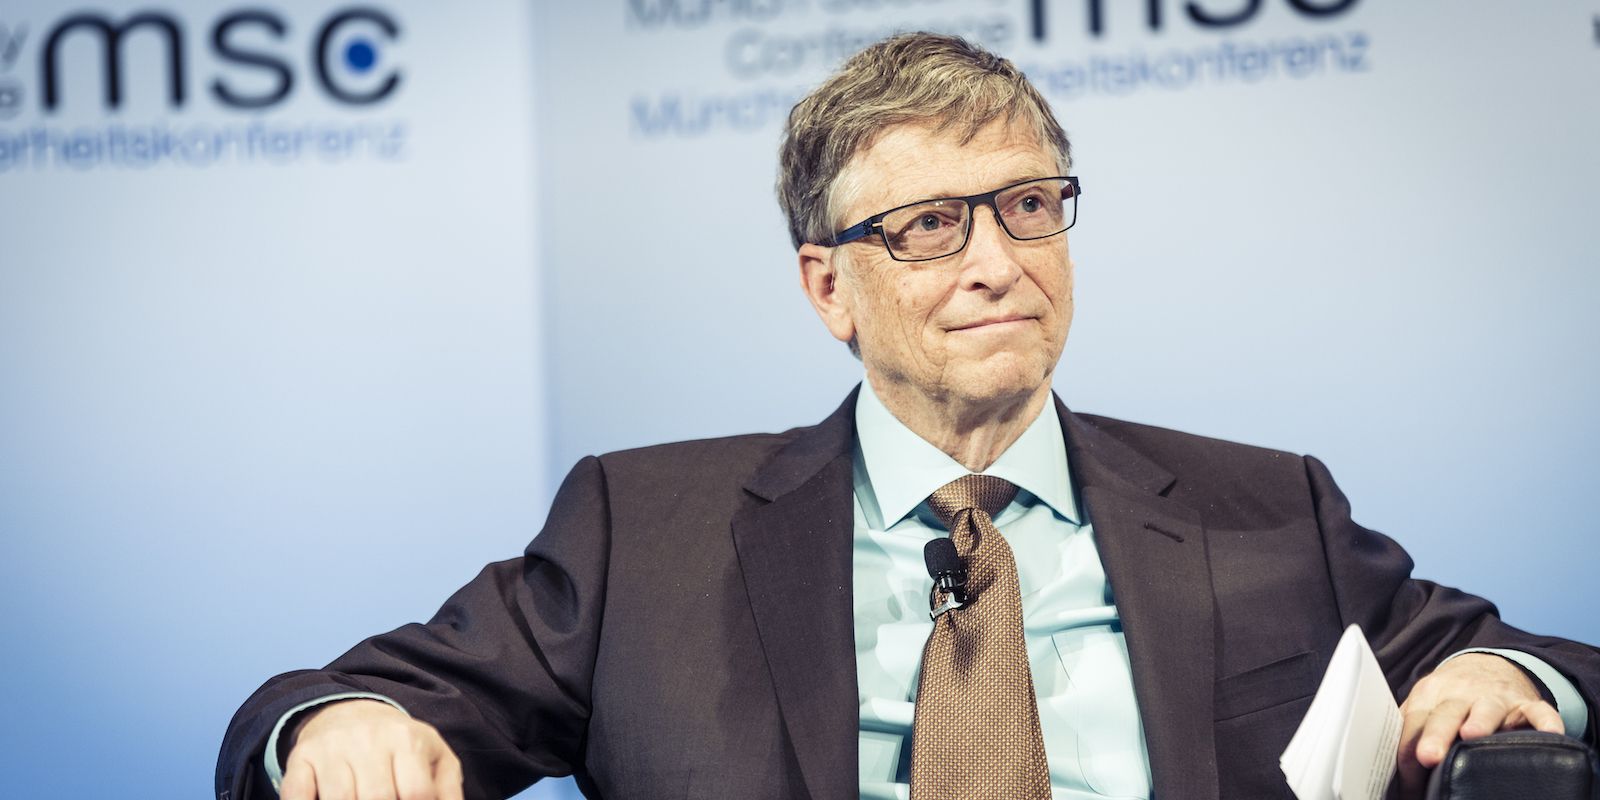 Bill Gates Speaking at Tech Event While Seated and Smiling